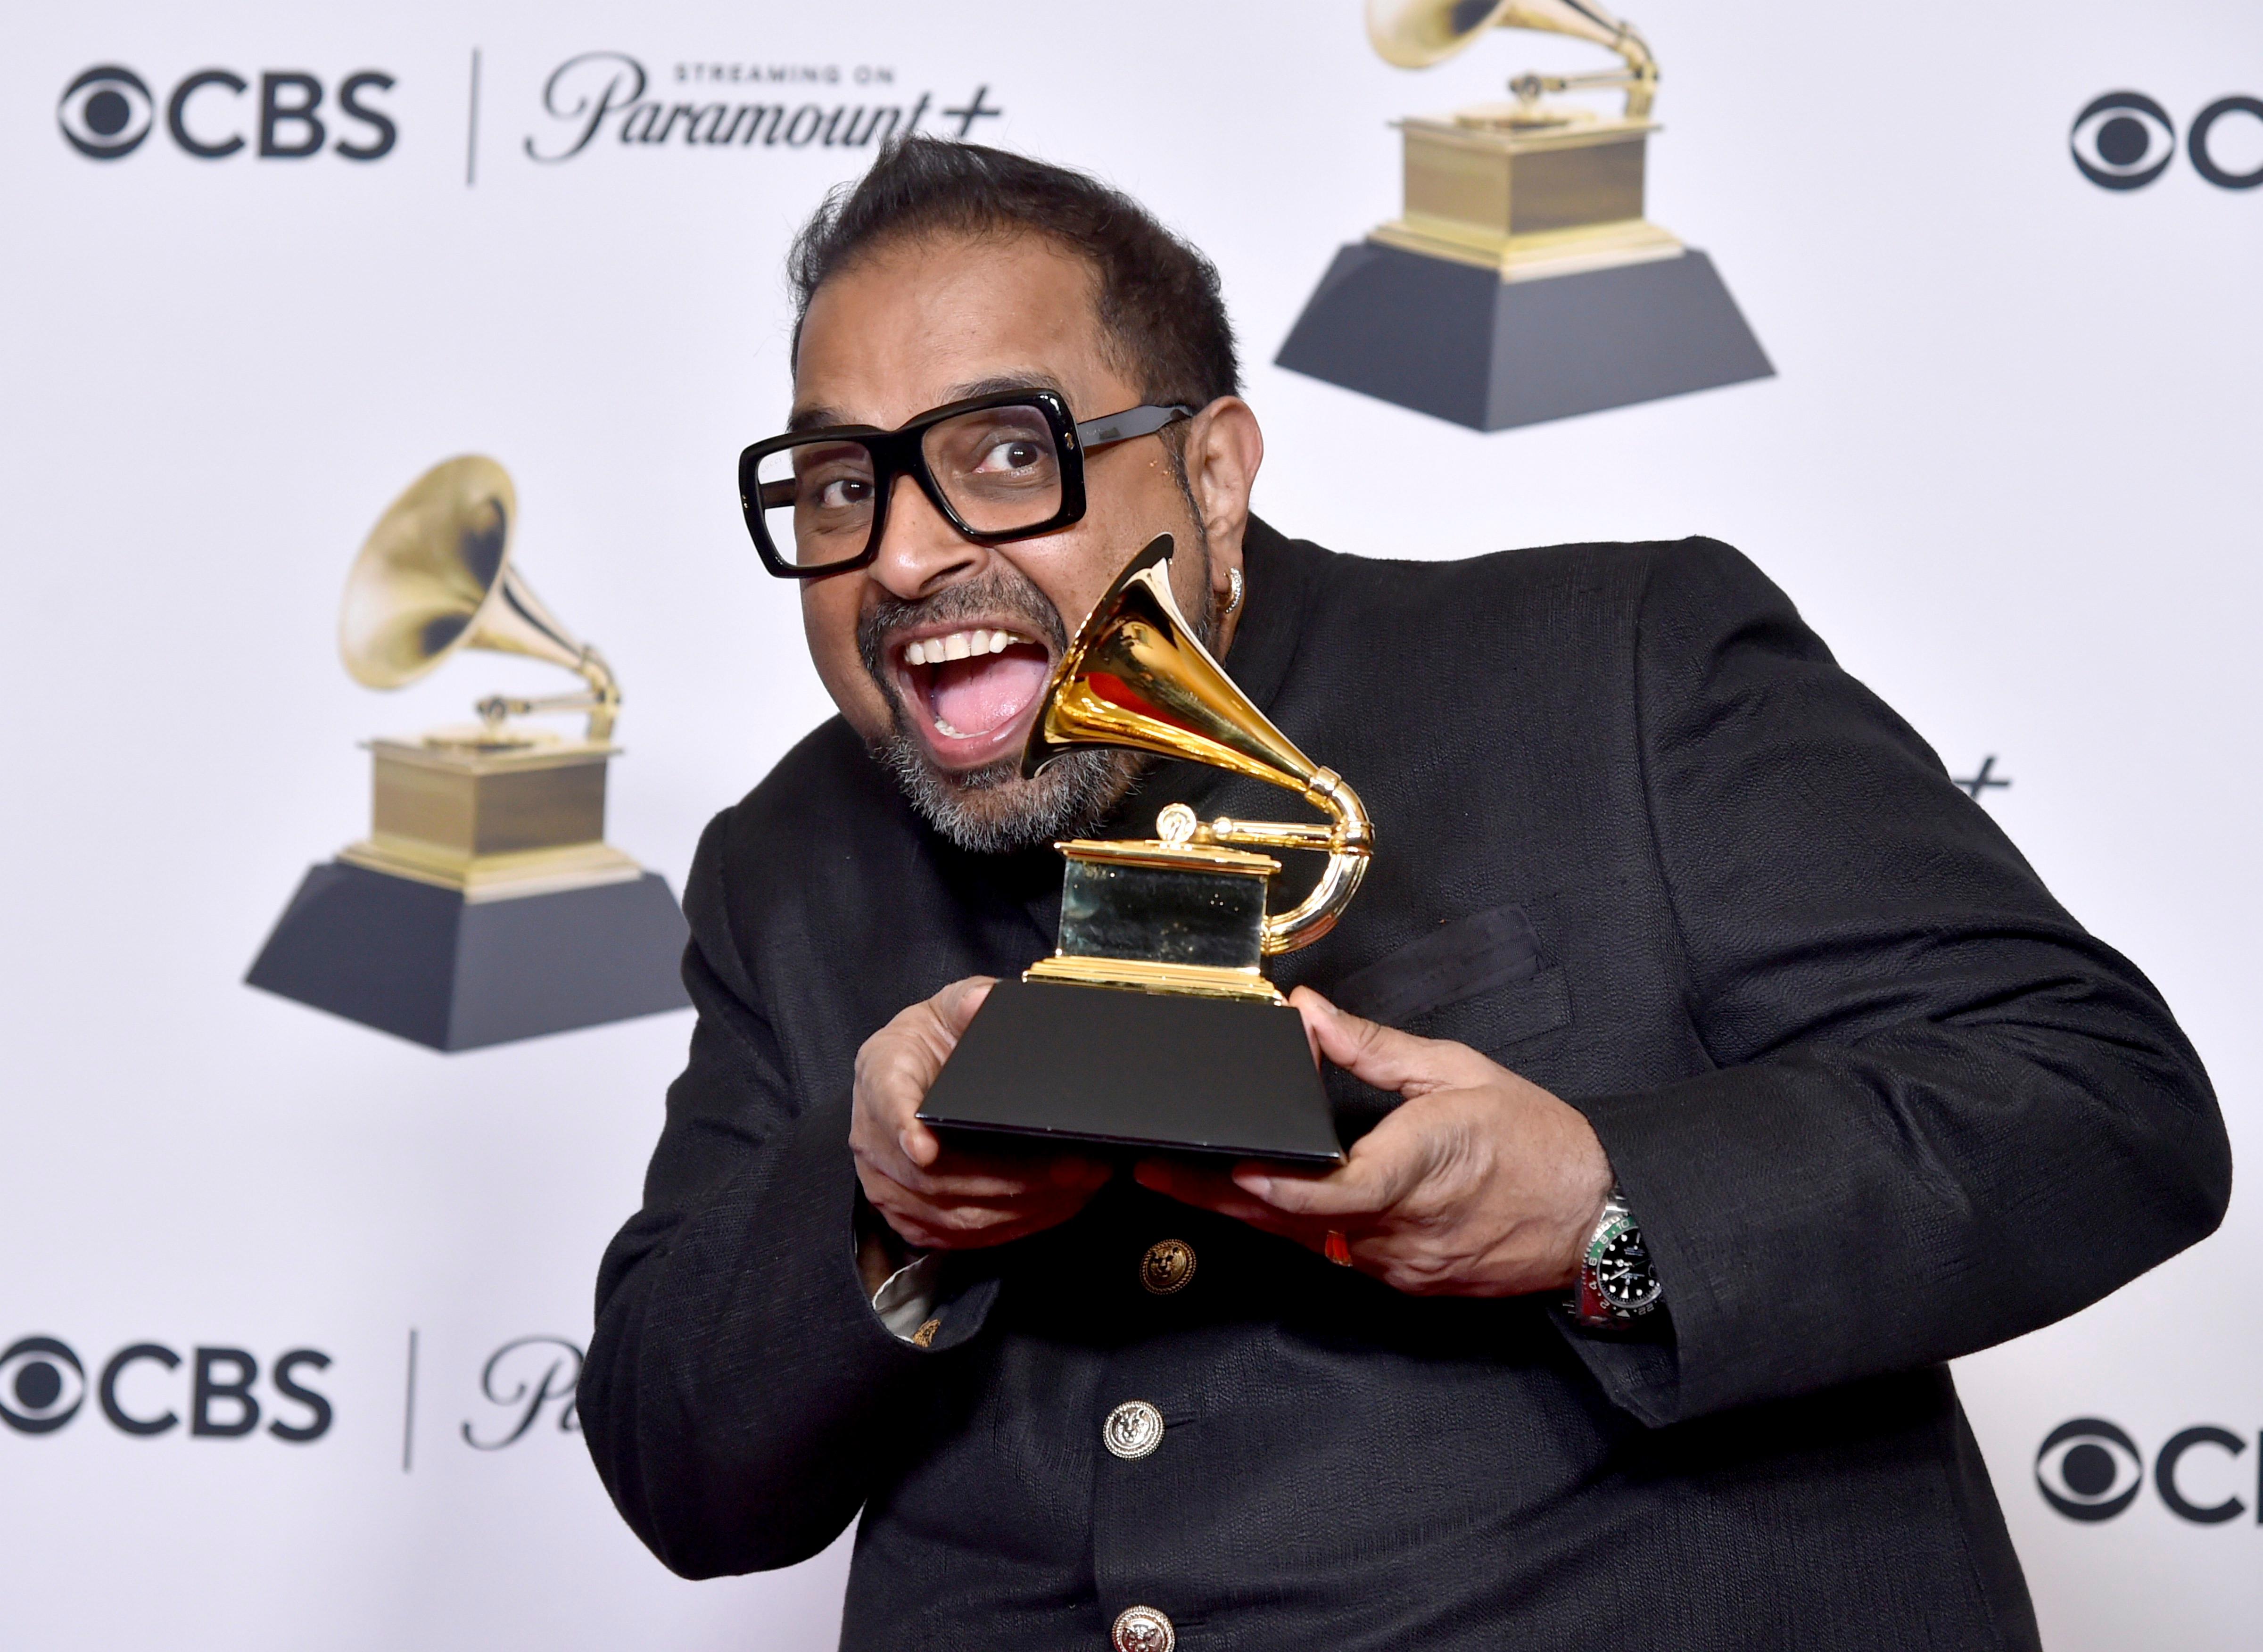 Singer-composer Shankar Mahadevan won his first Grammy as part of Shakti, the fusion band that won best global music album for 'This Moment'. (Photo: AP)